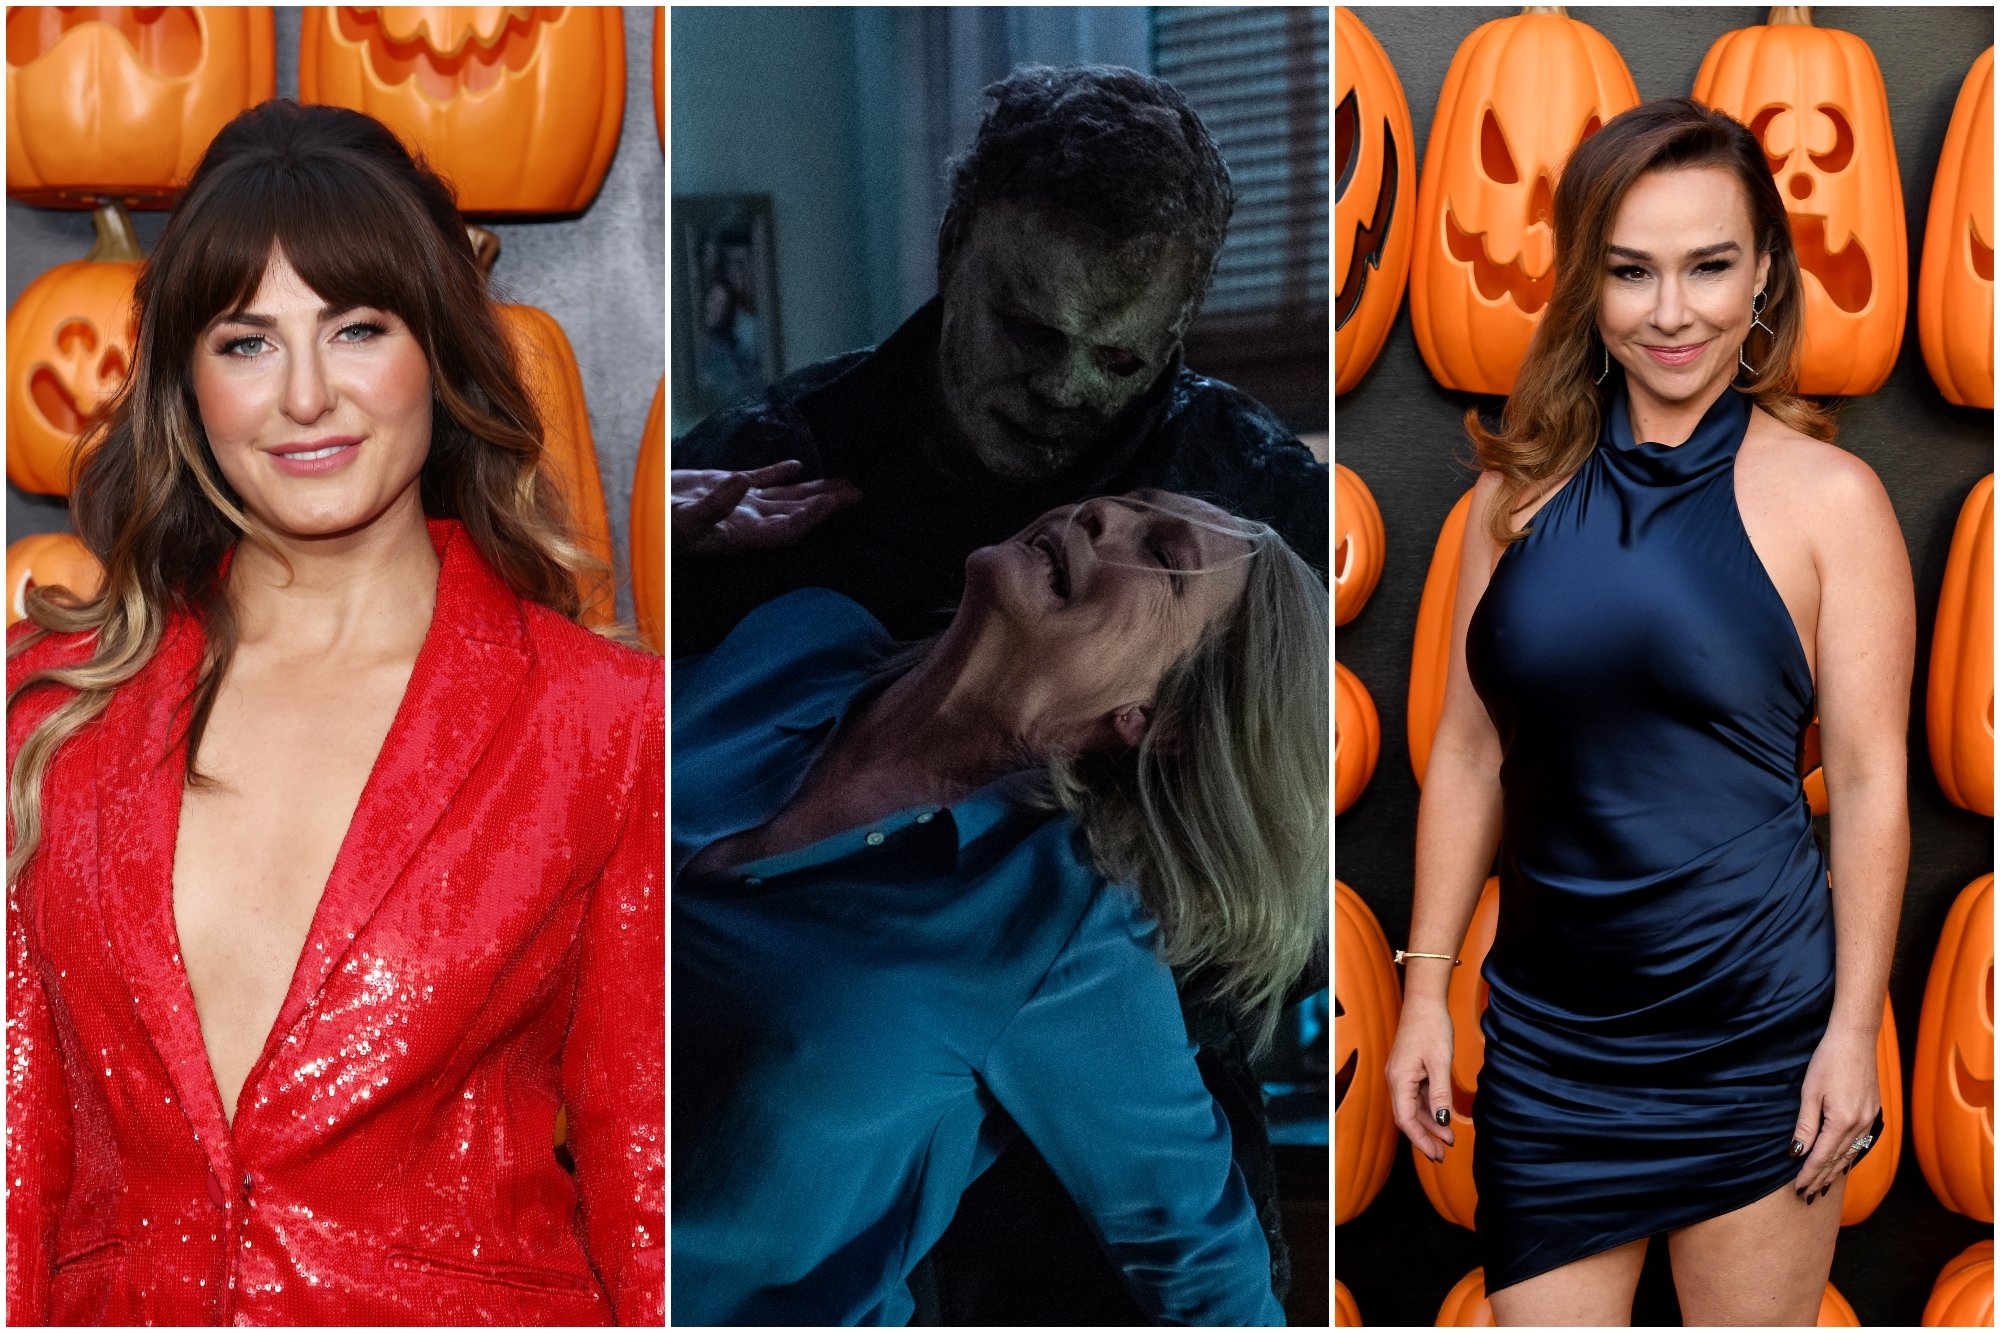 'Halloween Ends' Scout Taylor-Compton, James Jude Courtney as Michael Myers, Jamie Lee Curtis as Laurie Strode, and Danielle Harris in a collage. Taylor-Compton and Harris are in front of pumpkin backdrop. In center image, Curtis and Courtney are fighting.